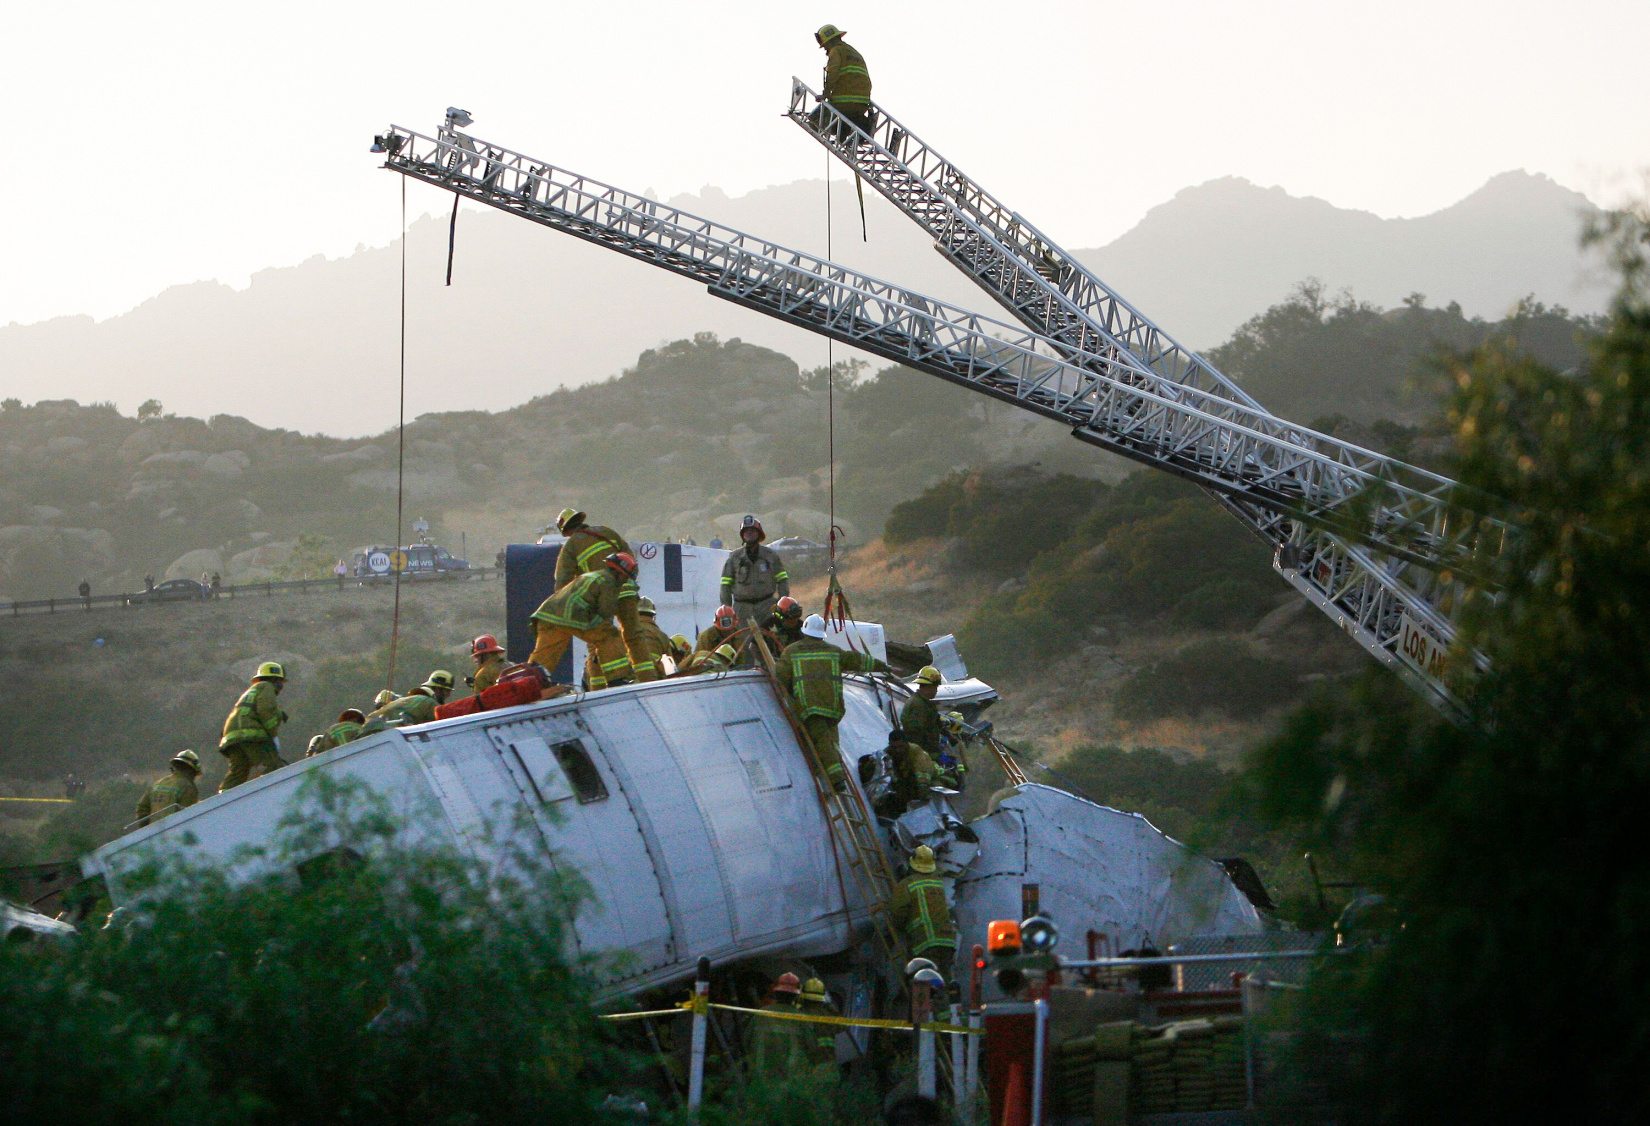 (LC: 20Jul-22) Firefighters work to rescue victim after a Metrolink commuter train en route from  Los Angeles' Union Station to Oxnard collided with a freight train in the Chatsworth area, September 12, 2008. Over 300 firefighters are working to douse flames and rescue victims, according to the Los Angeles Fire Department. Image Credit: Alamy | REUTERS/Gus Ruelas (UNITED STATES) | ID: 2D1M052